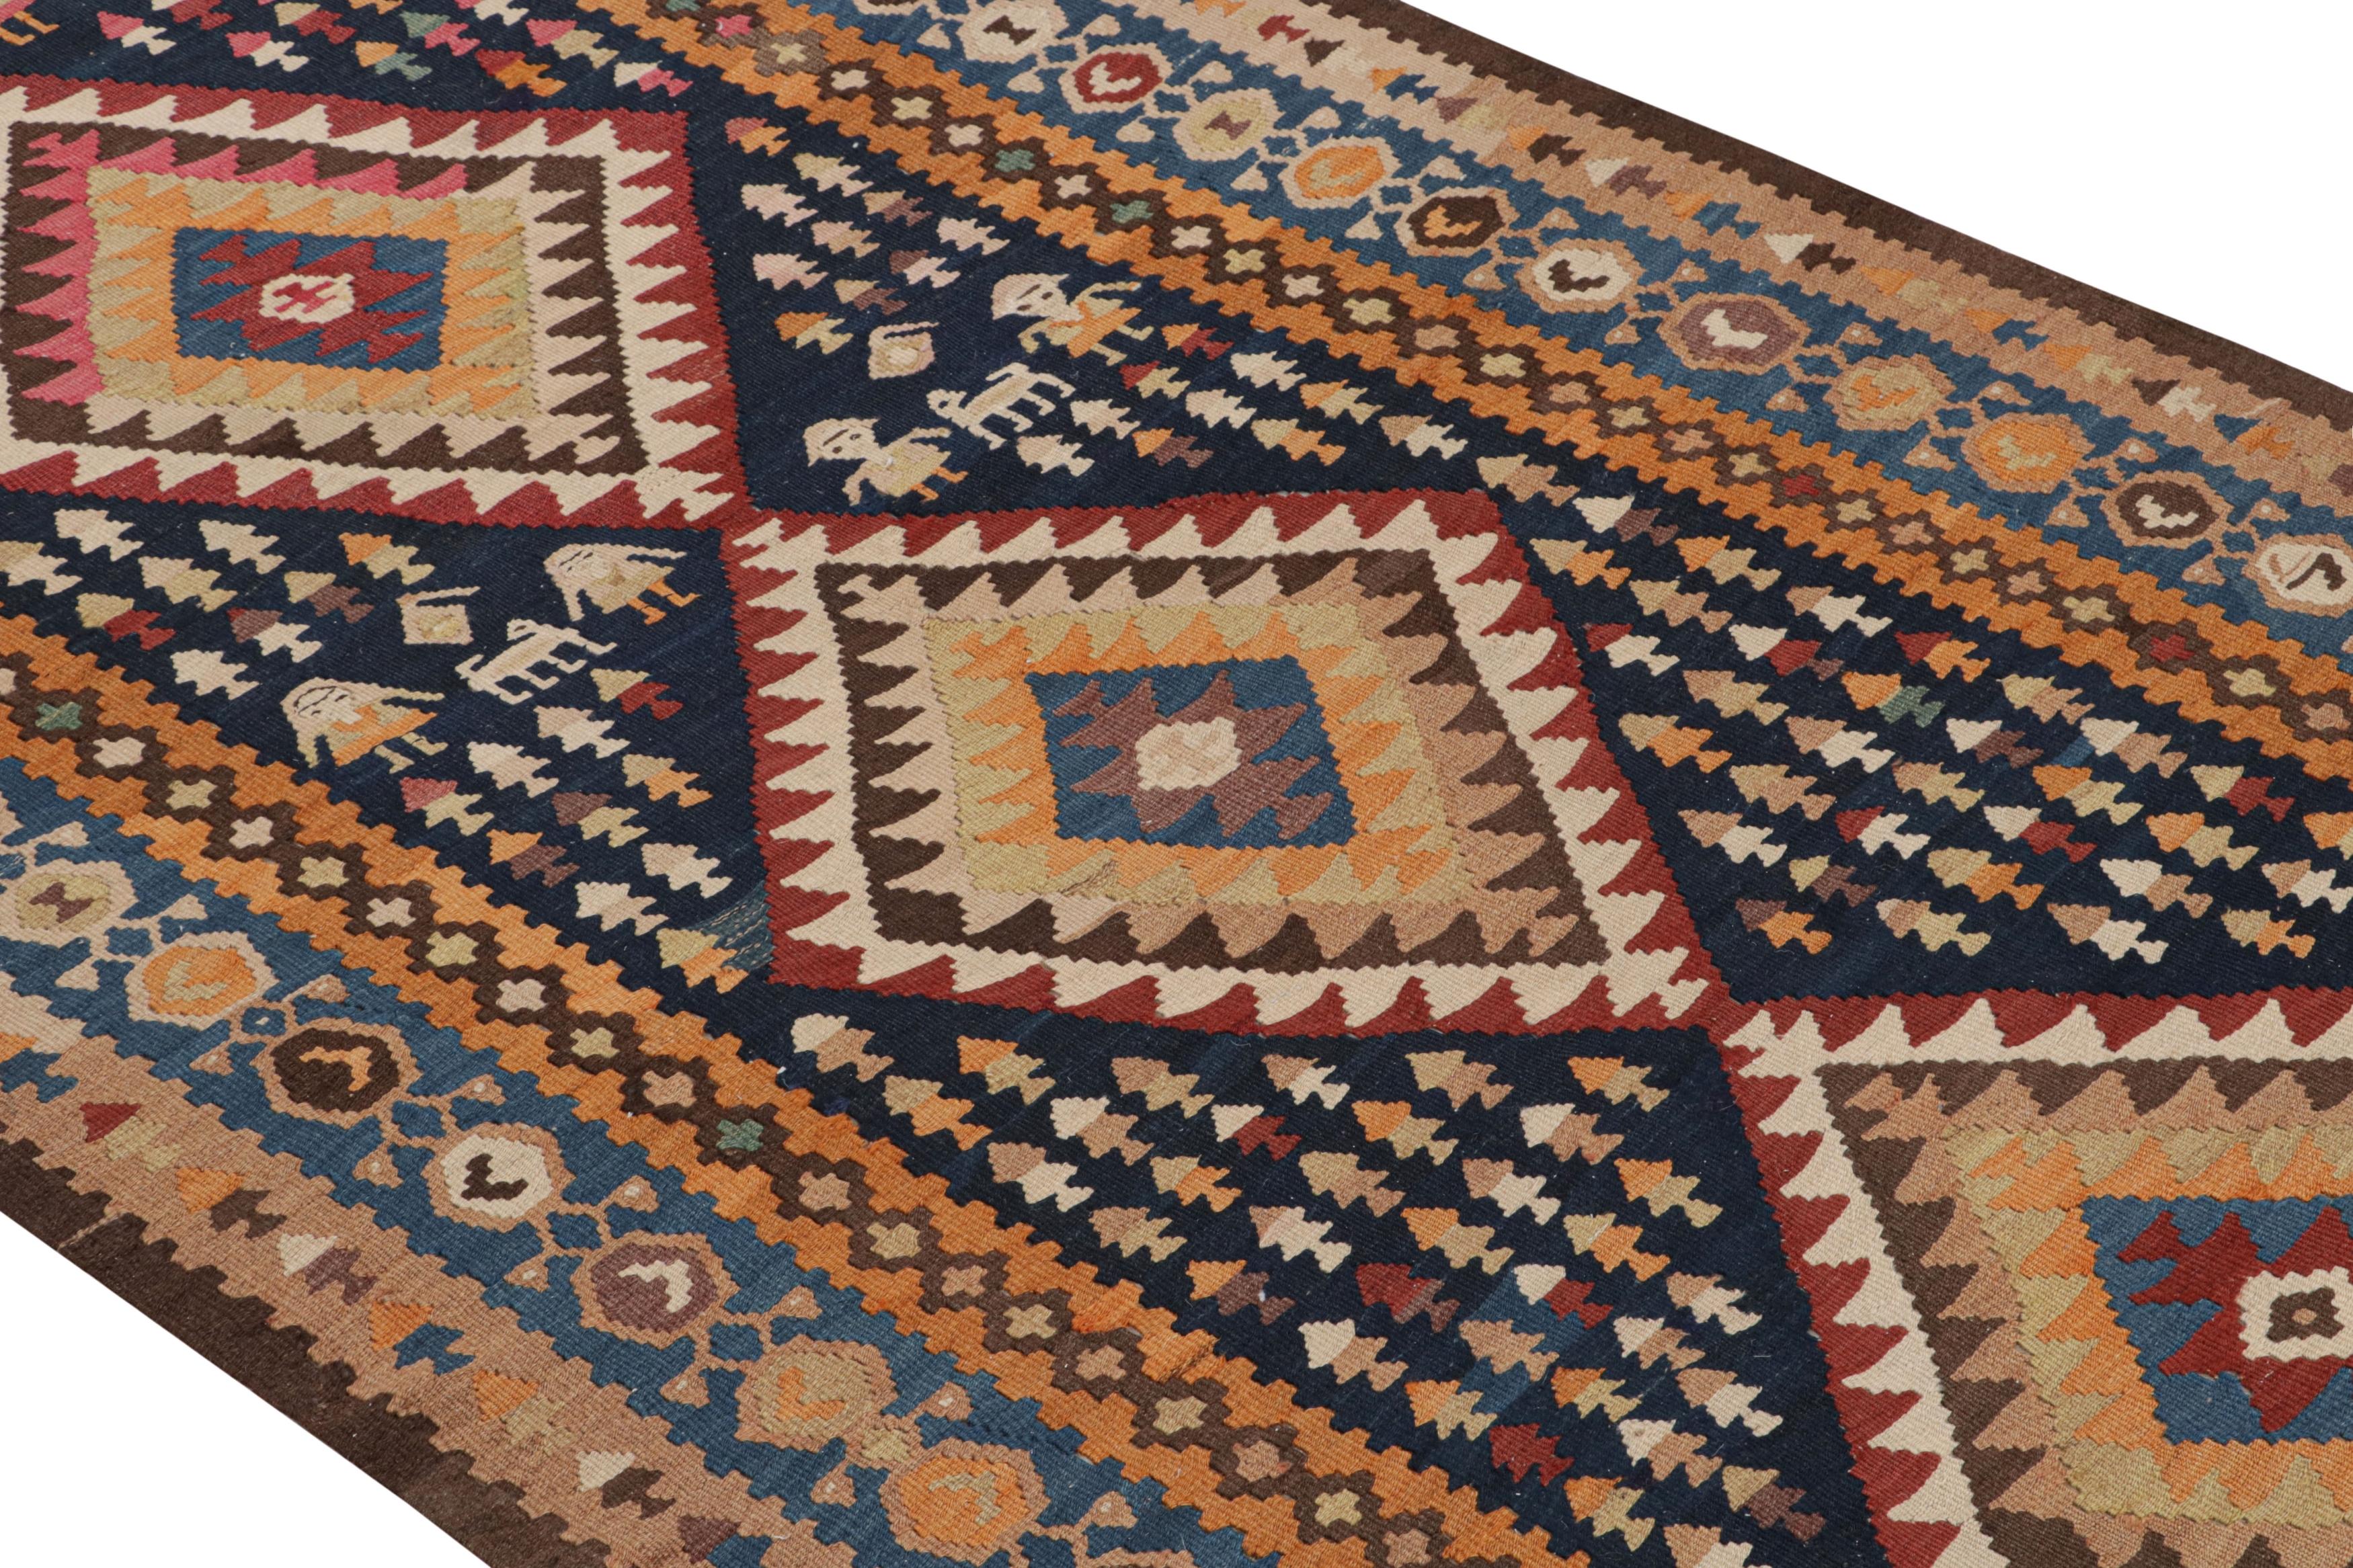 Handwoven in wool originating between 1950-1960, this vintage midcentury Persian kilim runner hails from the Bidjar (Bijar) region, known for exceptionally durable and sought-after pieces among tribal rarities. The field designs host an uncommon